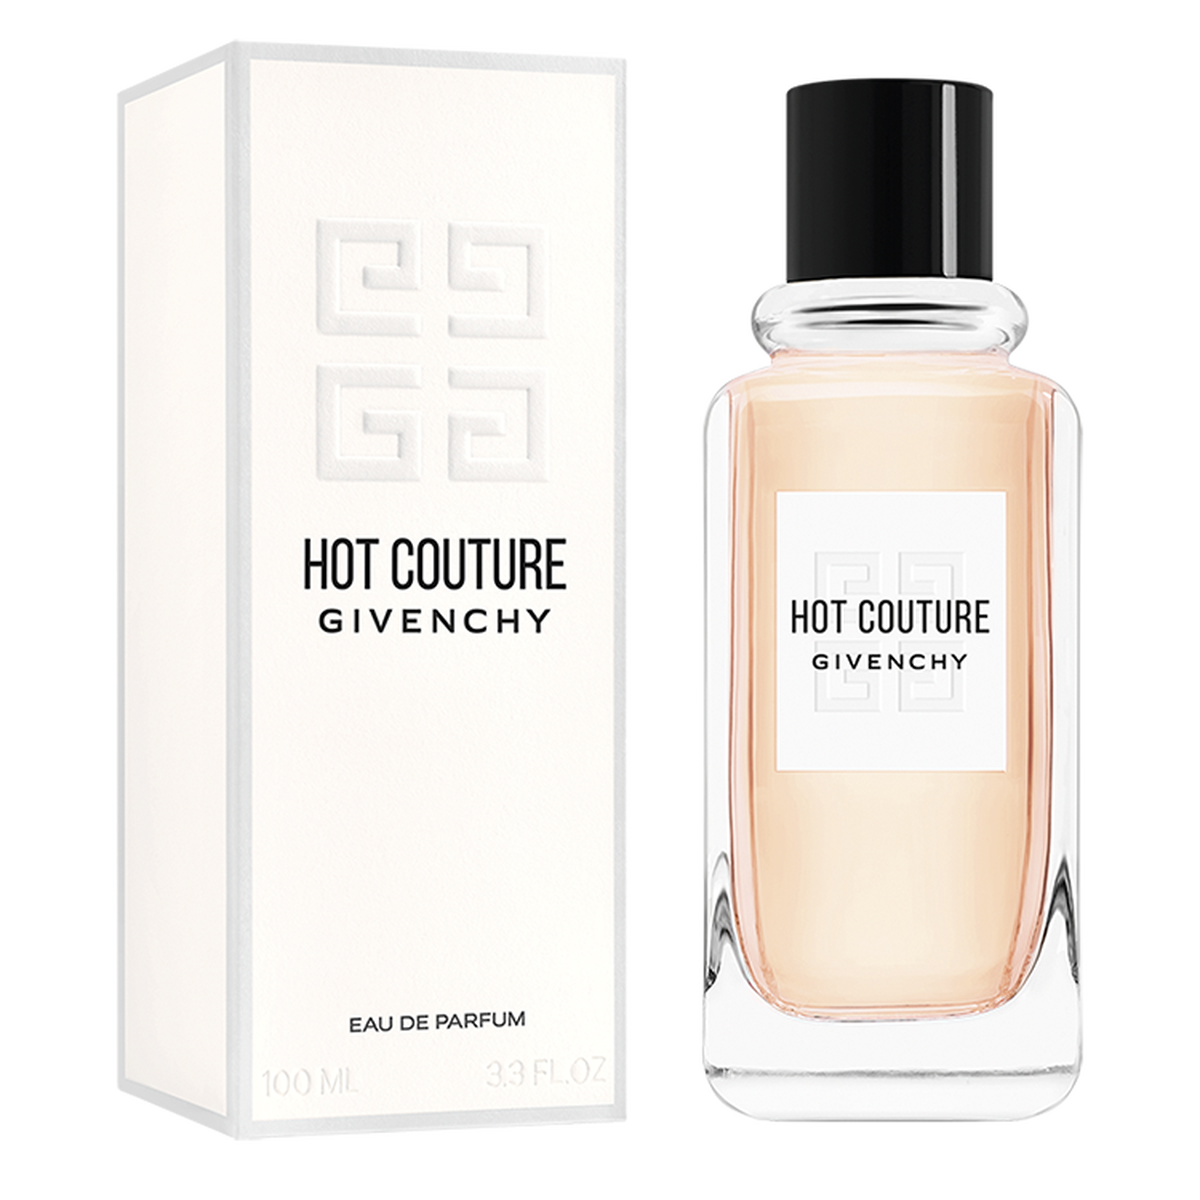 HOT COUTURE